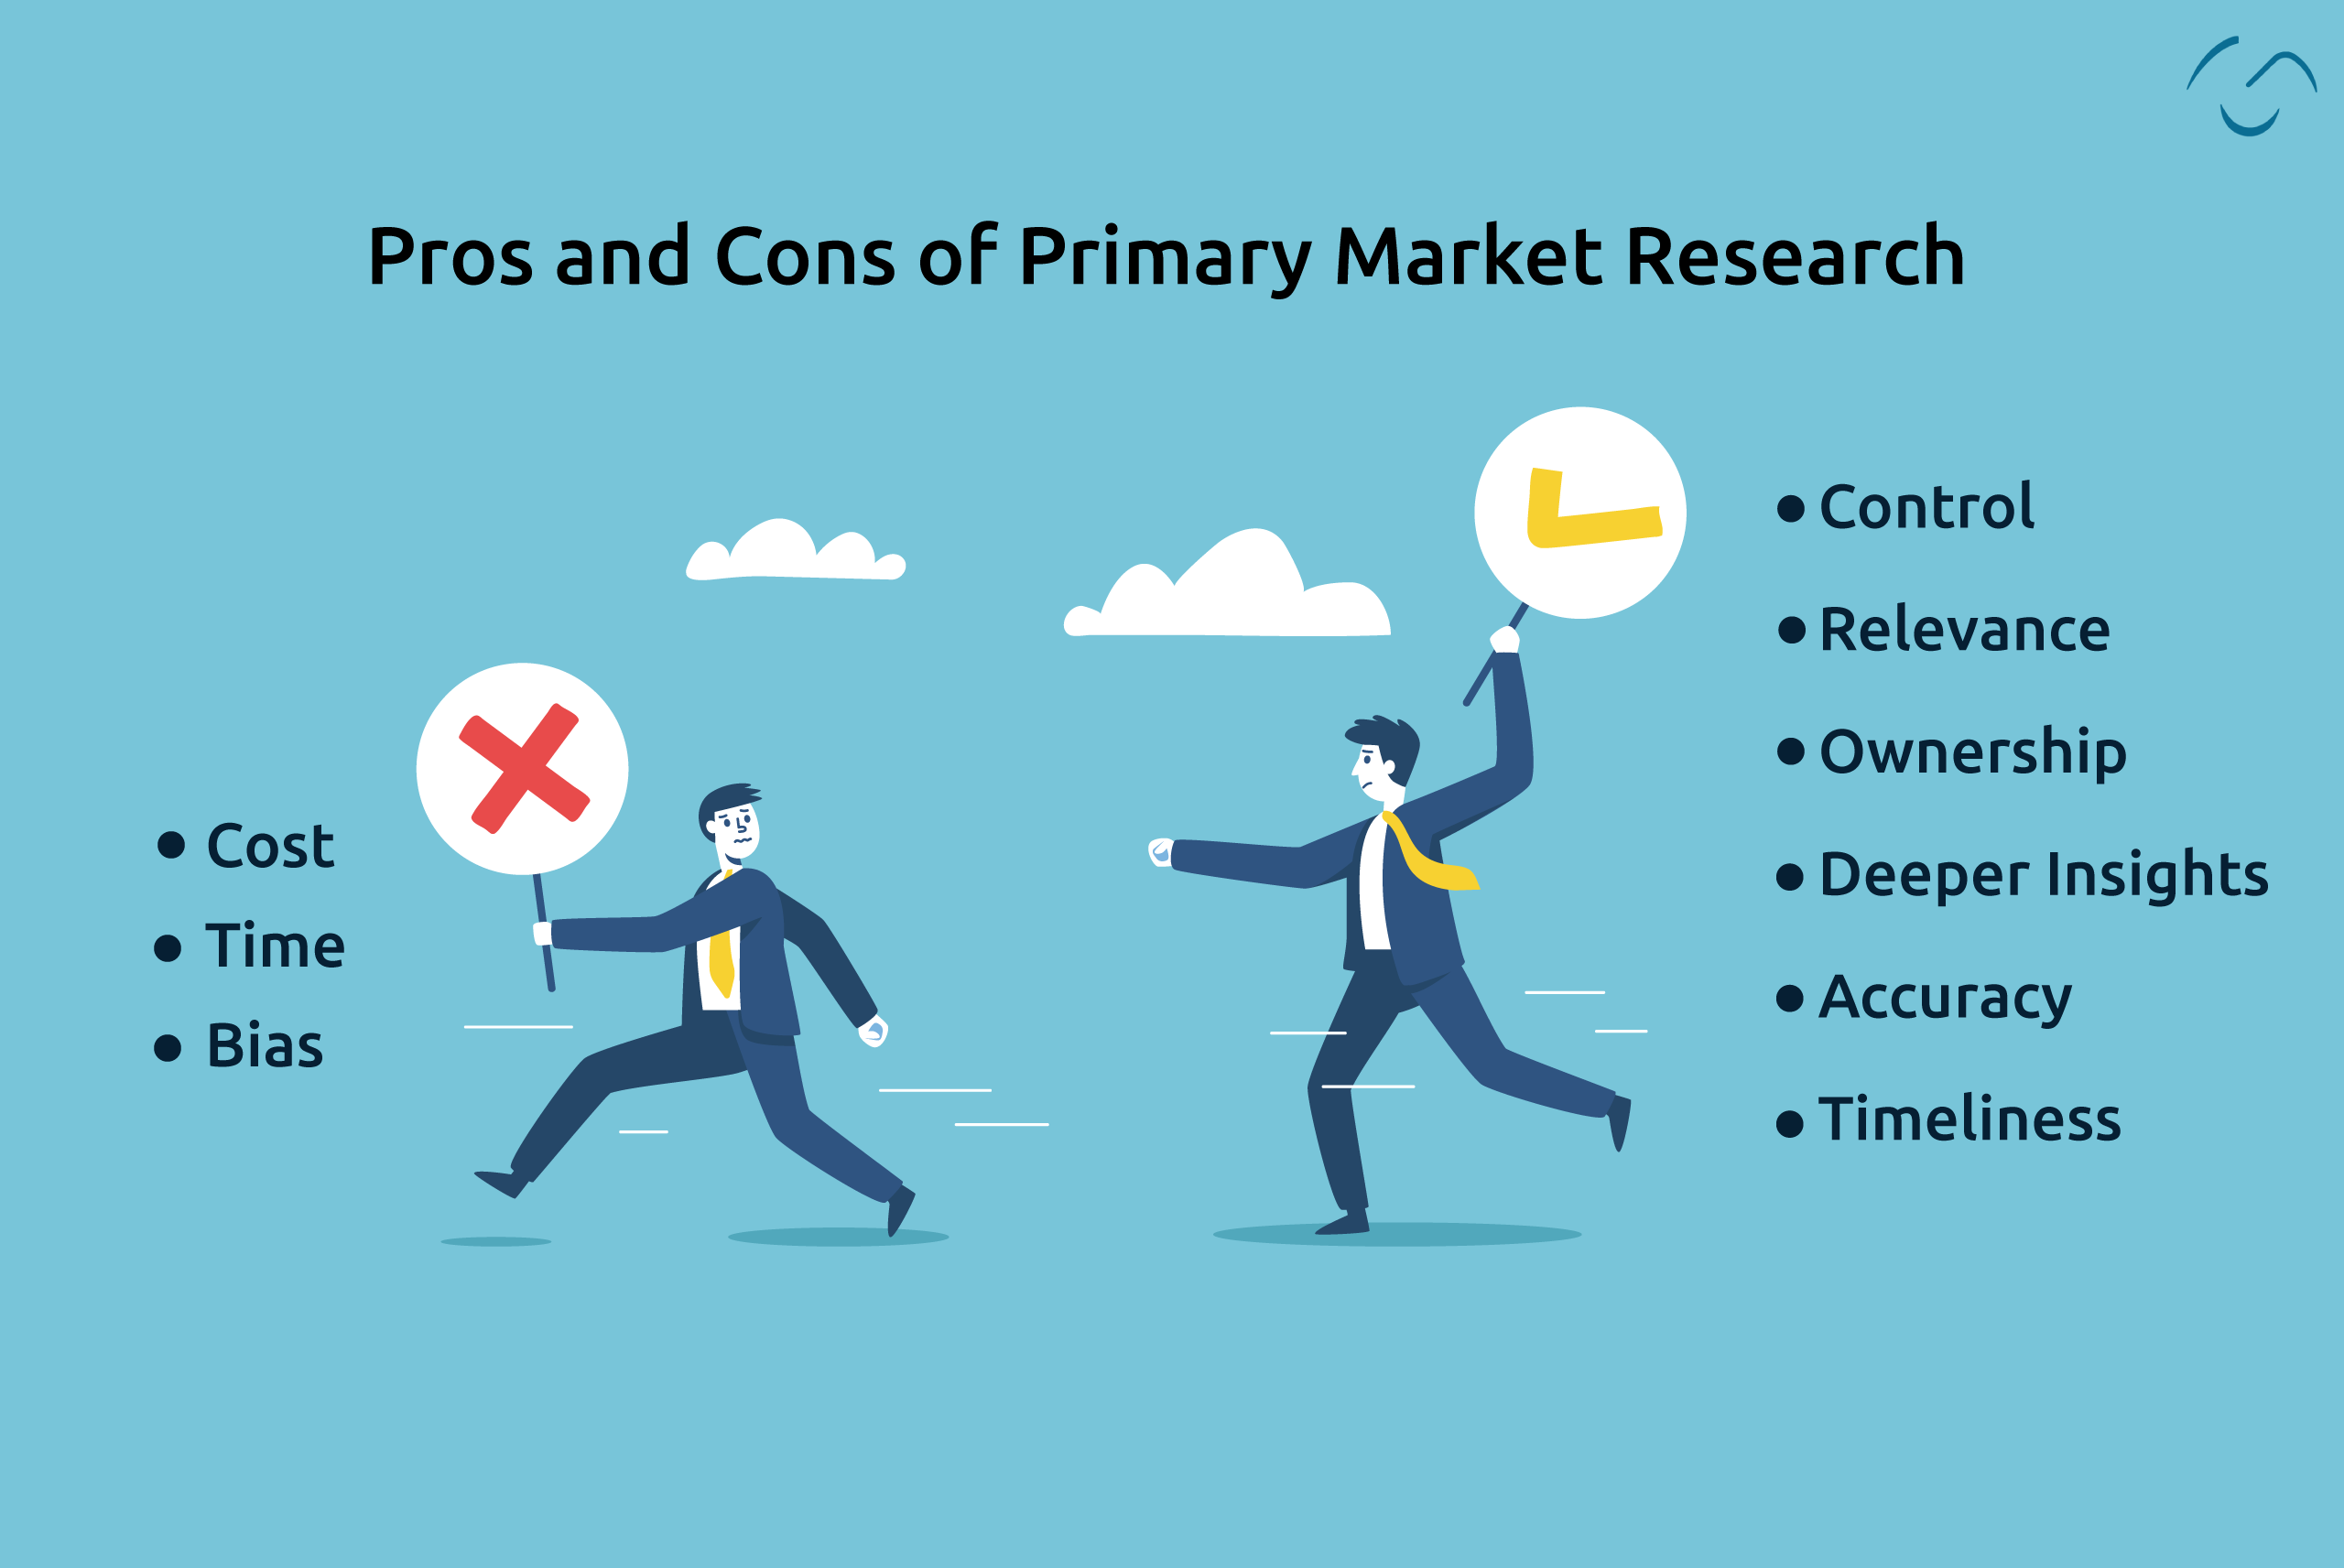 pros/cons of primary market research